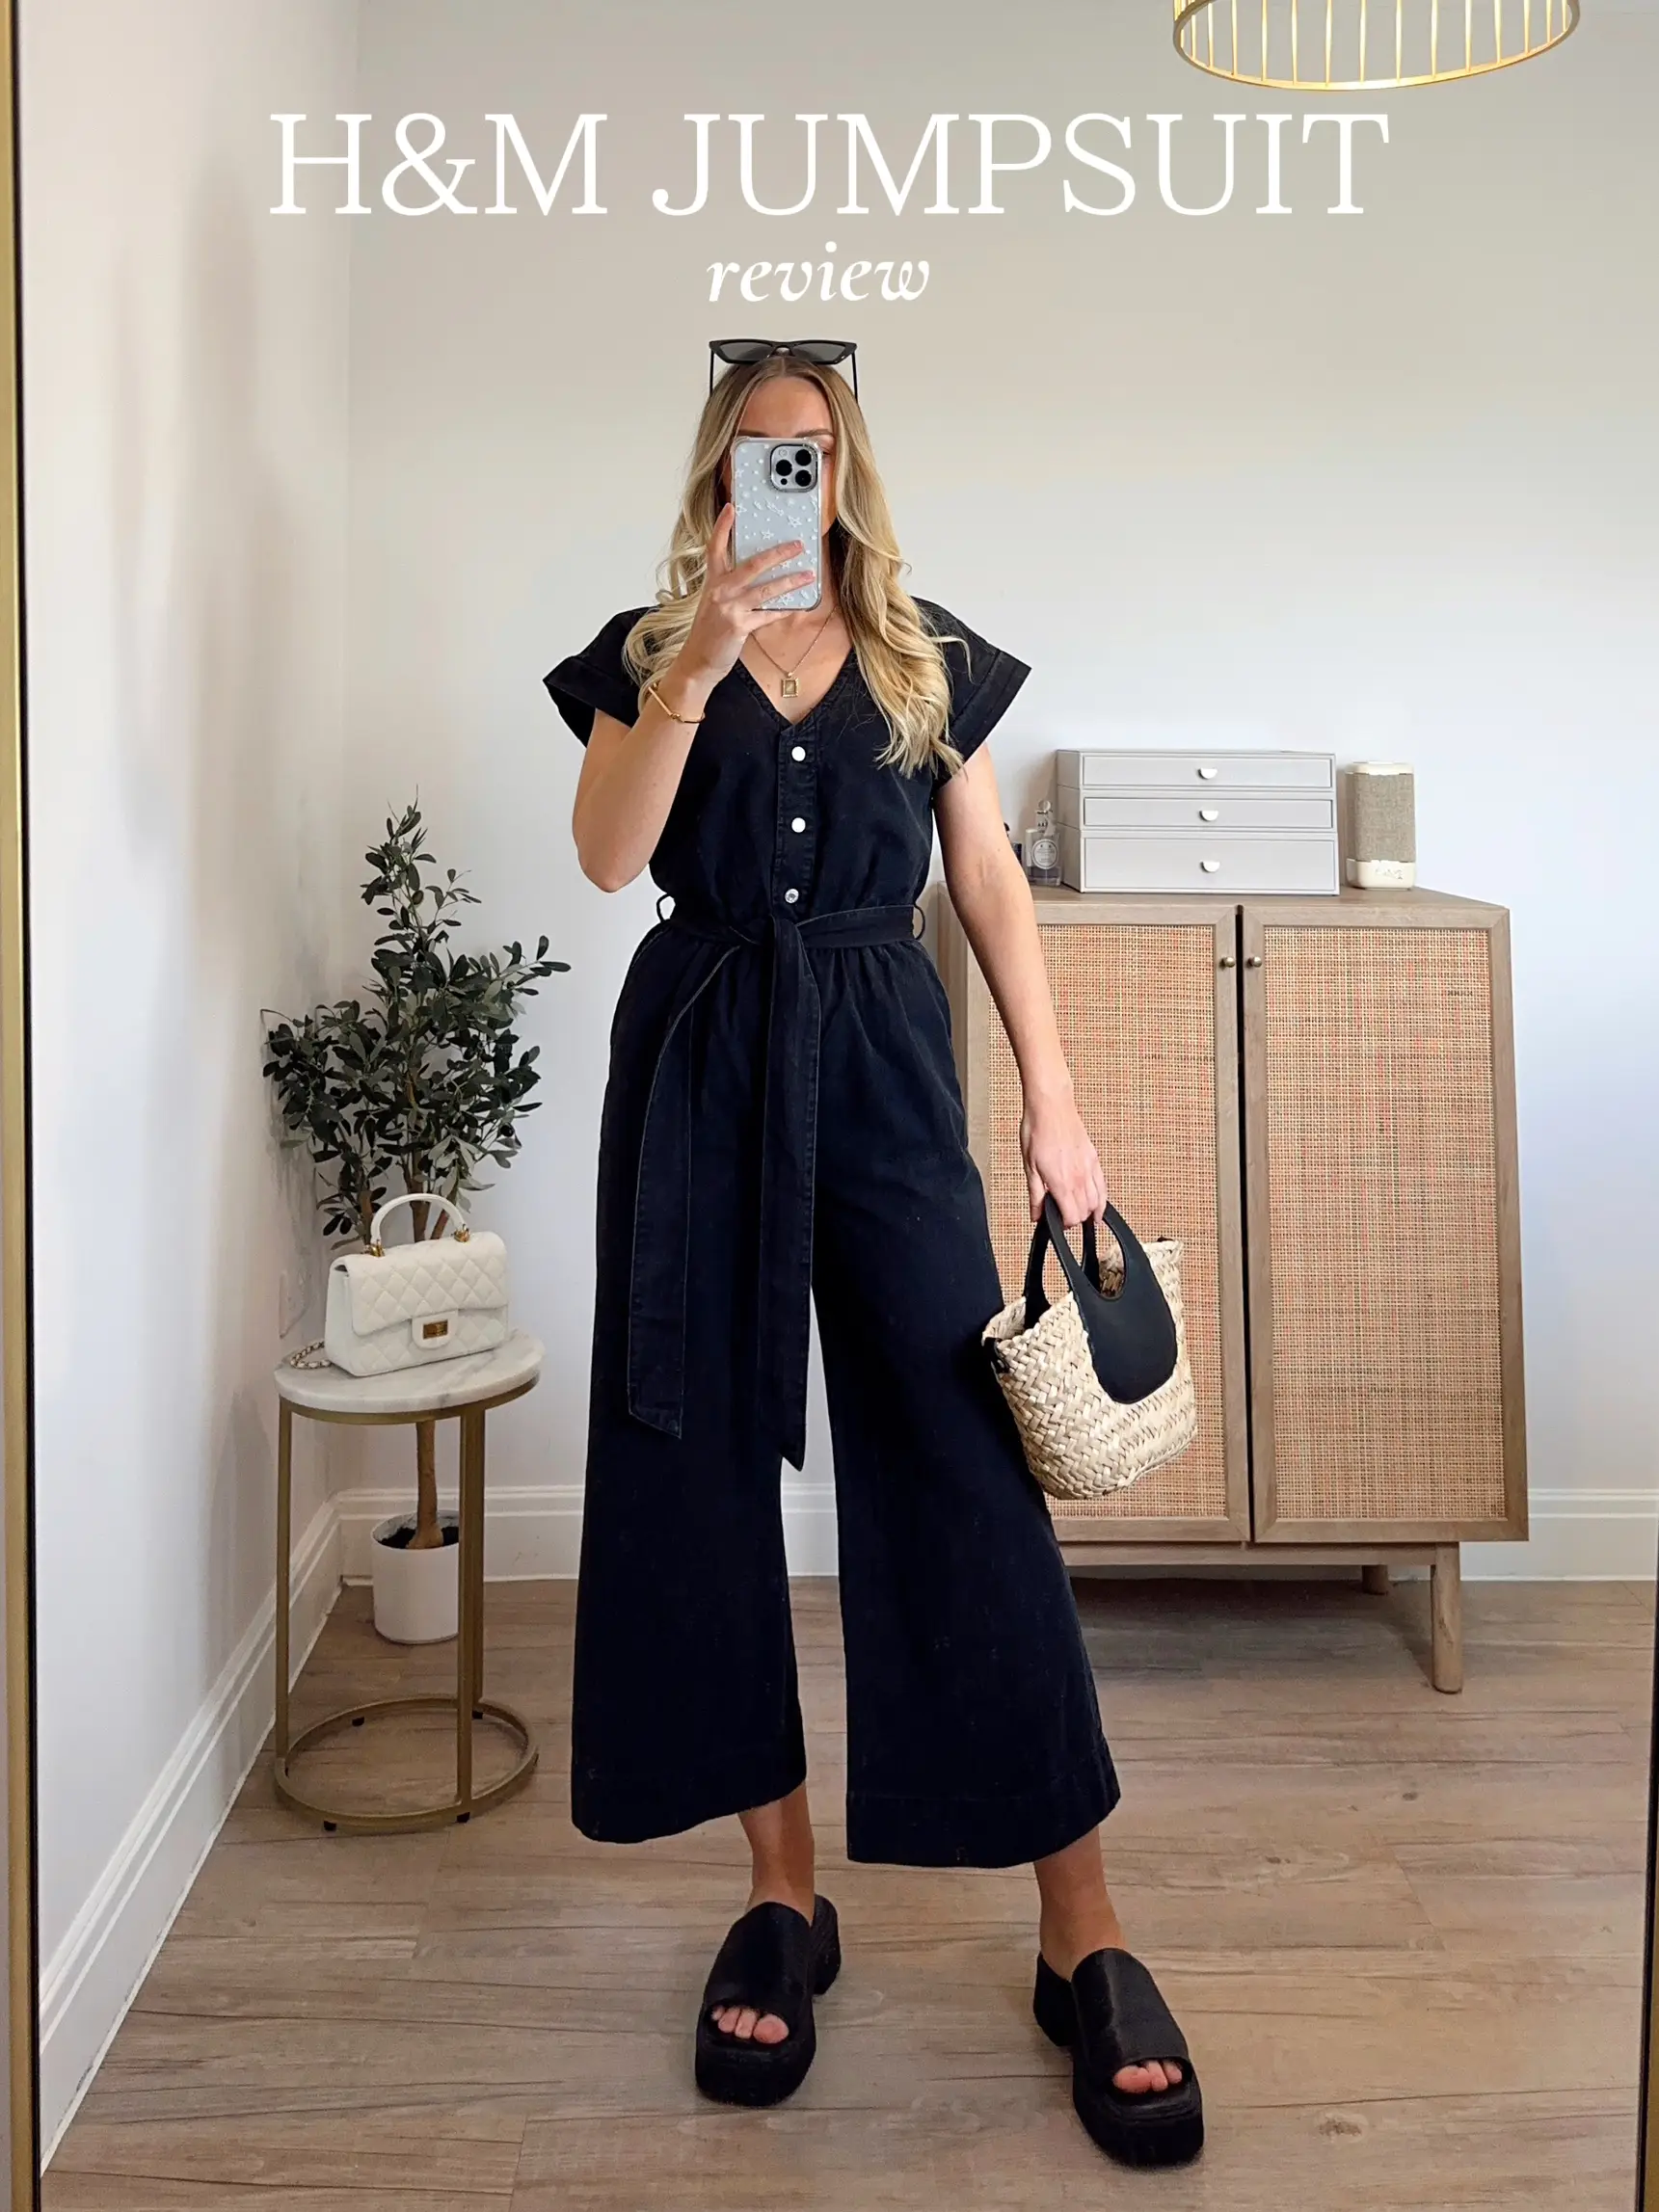 H&M Jumpsuit Review, Gallery posted by Emily James